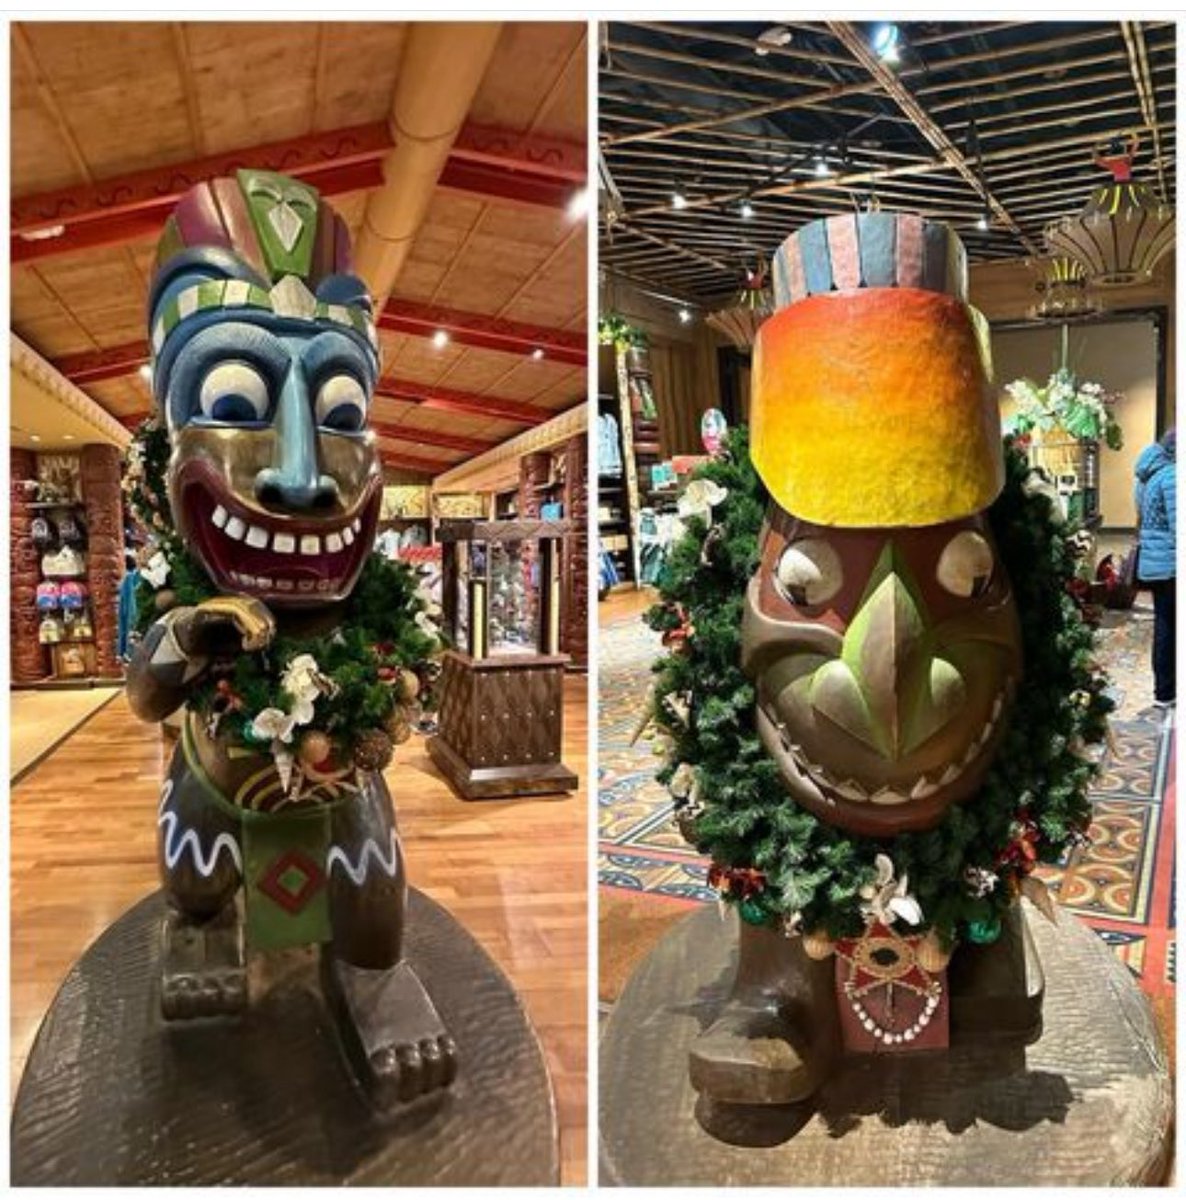 Tiki Tuesday. Never stayed at Disney's Polynesian Village Resort but we do visit often to shop, snack, or grab beverages. These tiki's are Disney's version of Walmart greeters. We did attend Spirit of Aloha Dinner Show 'luau' before it was discontinued and we have enjoyed the…